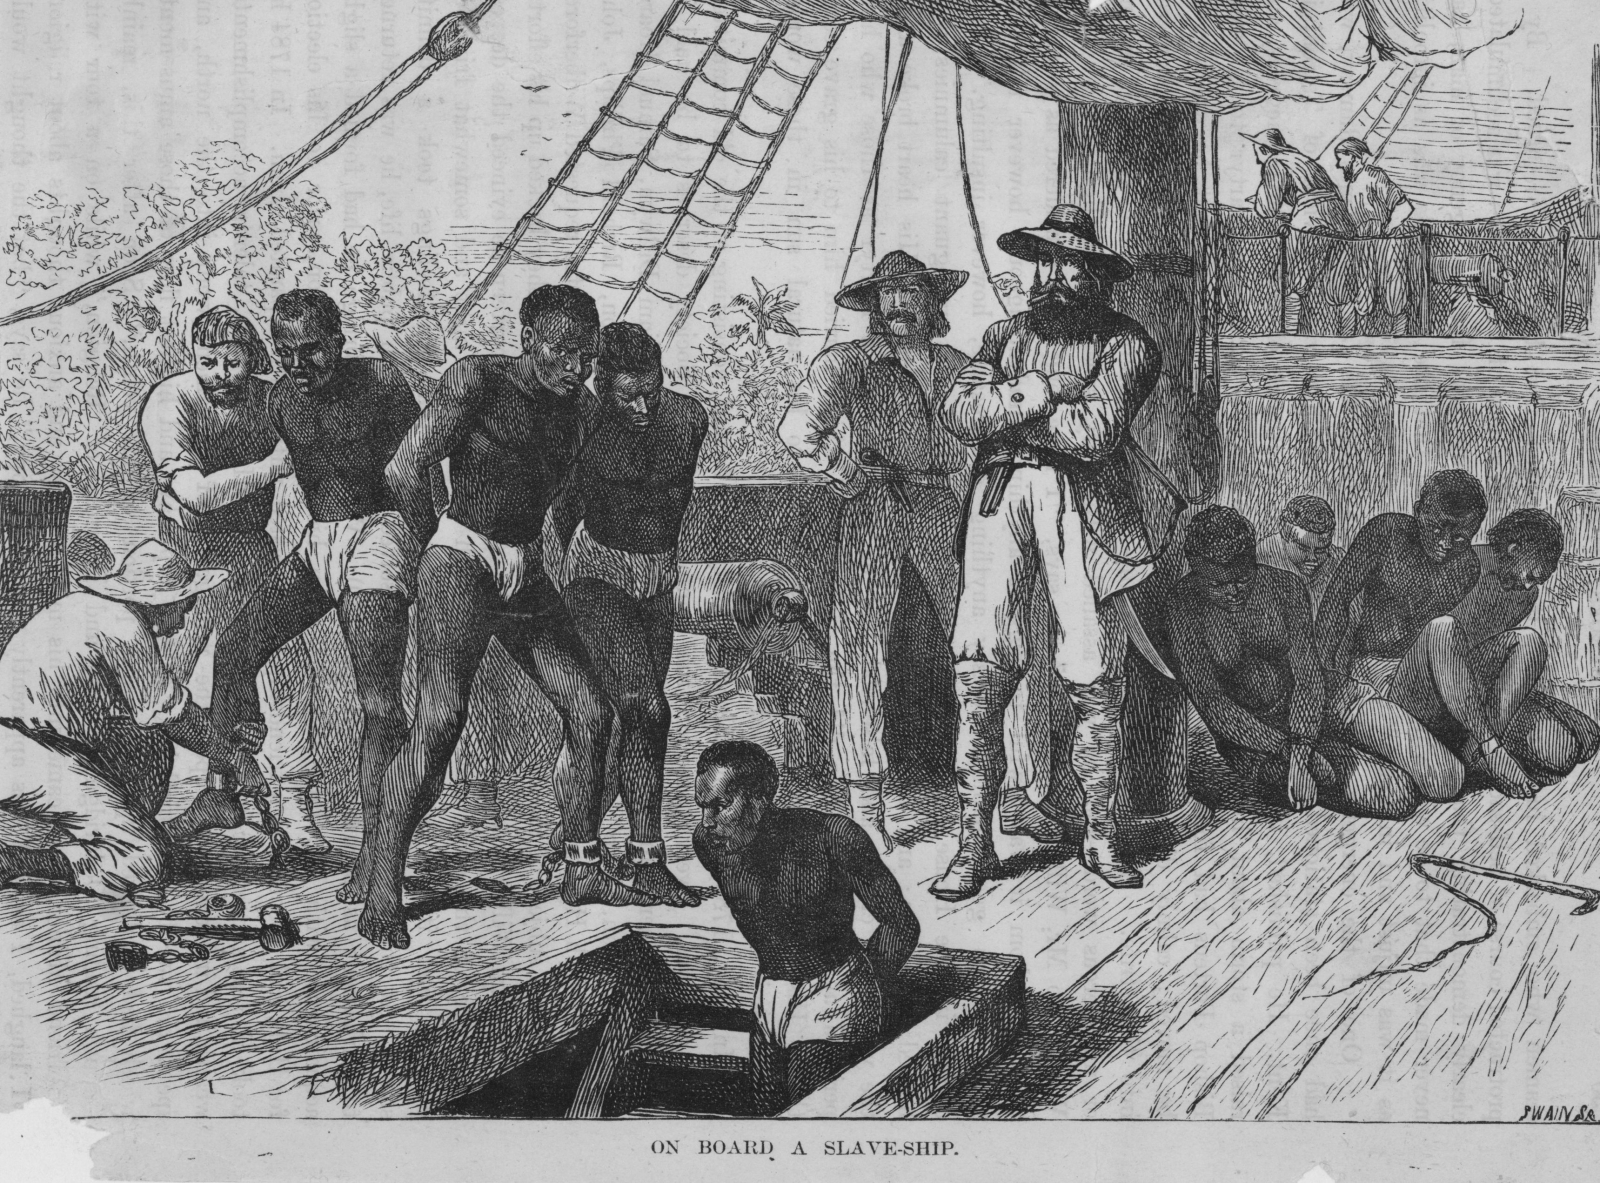 The Economist Apologises for Book Review Complaining Black Slaves